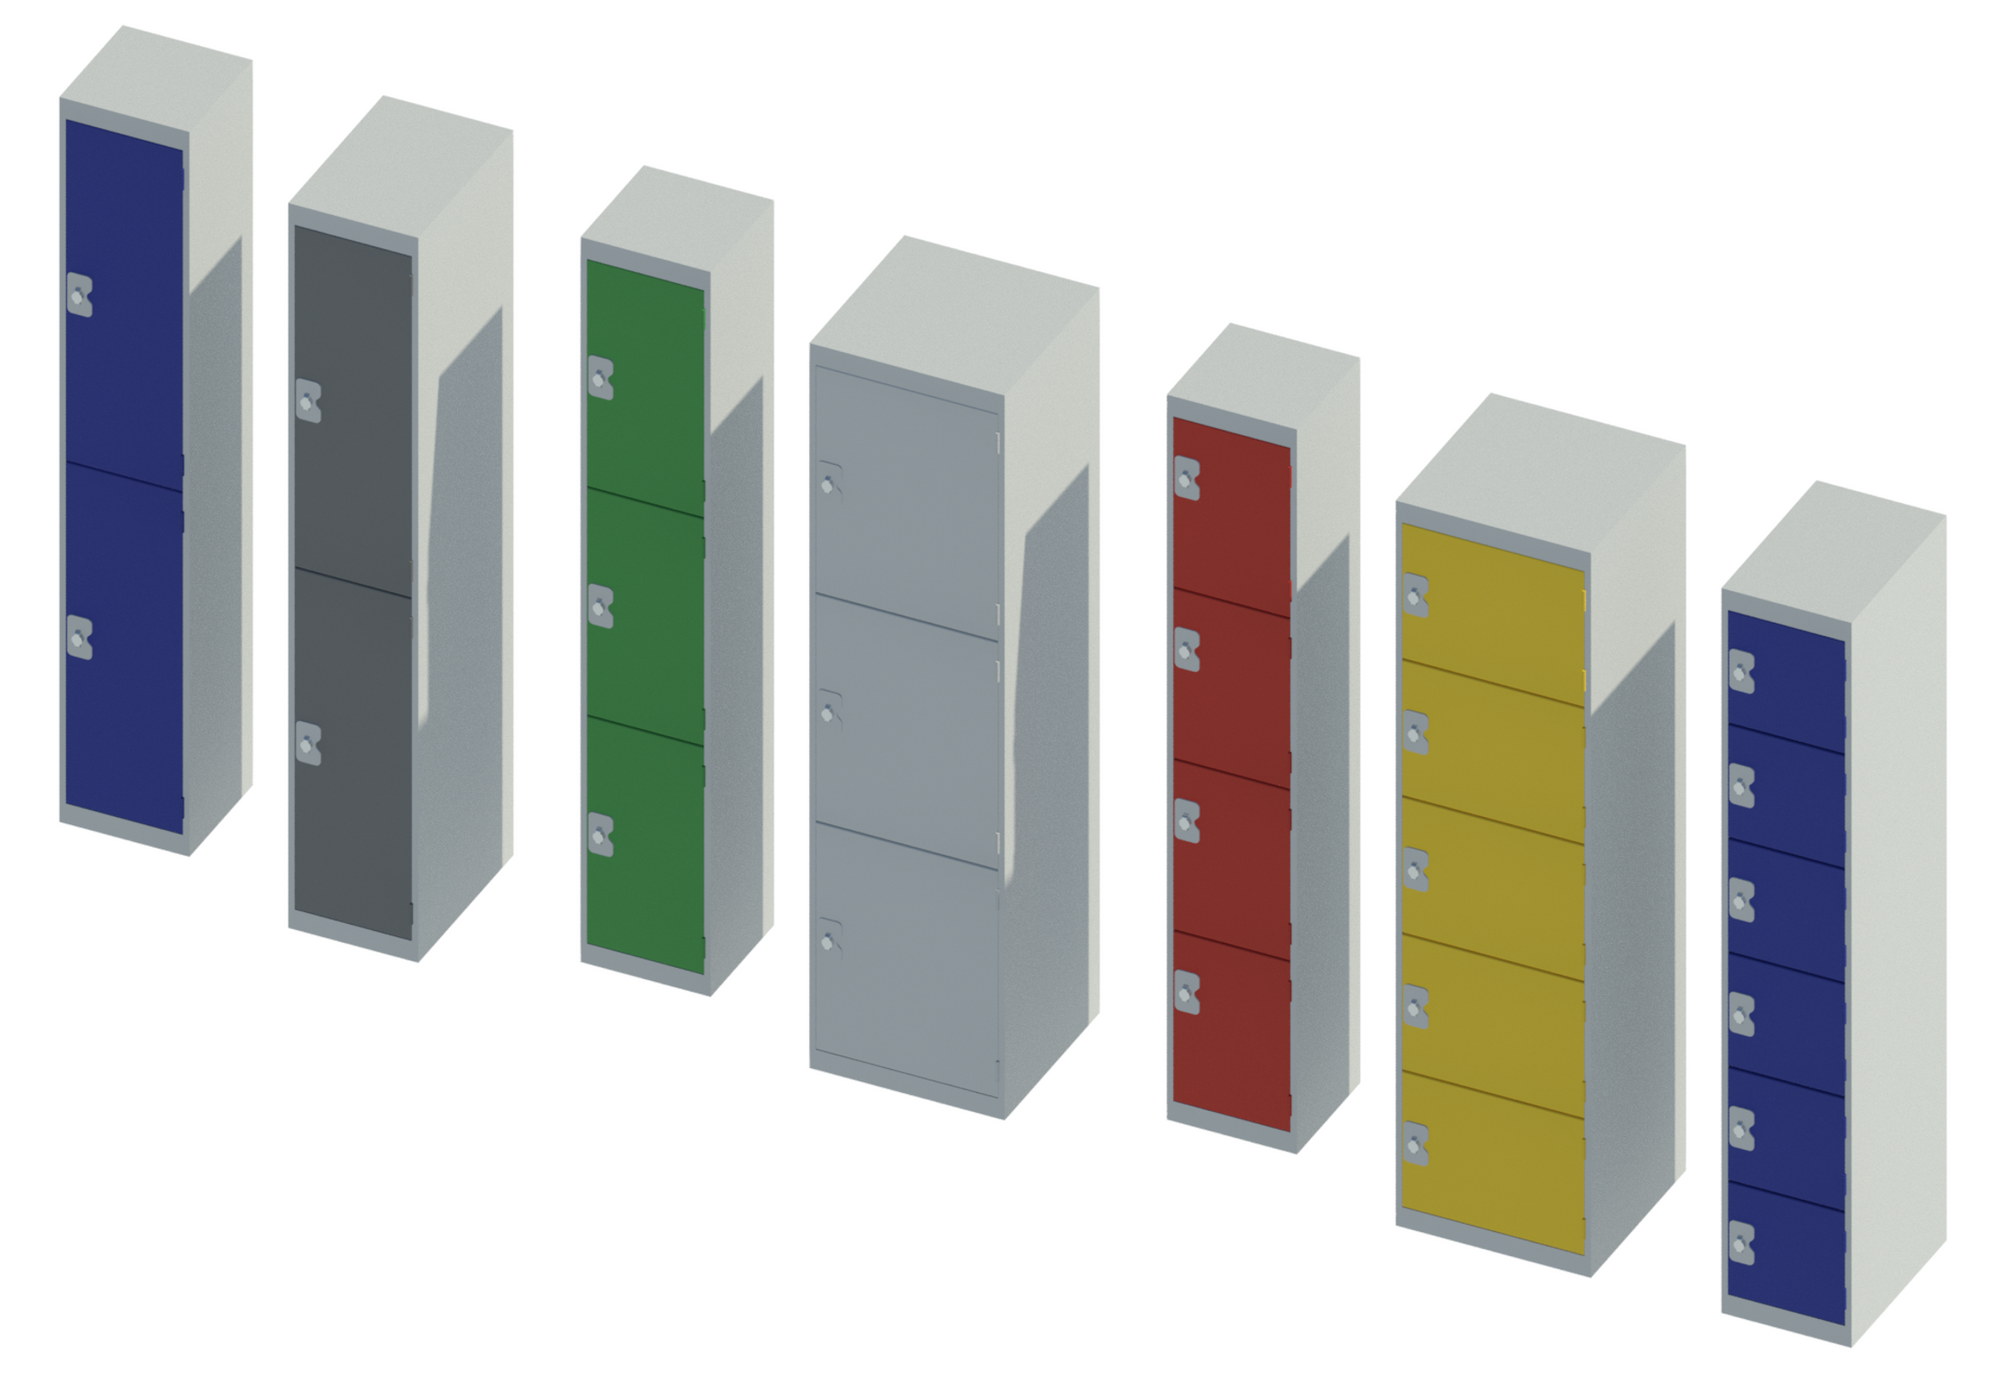 Render of Revit locker families in various colors and sizes.